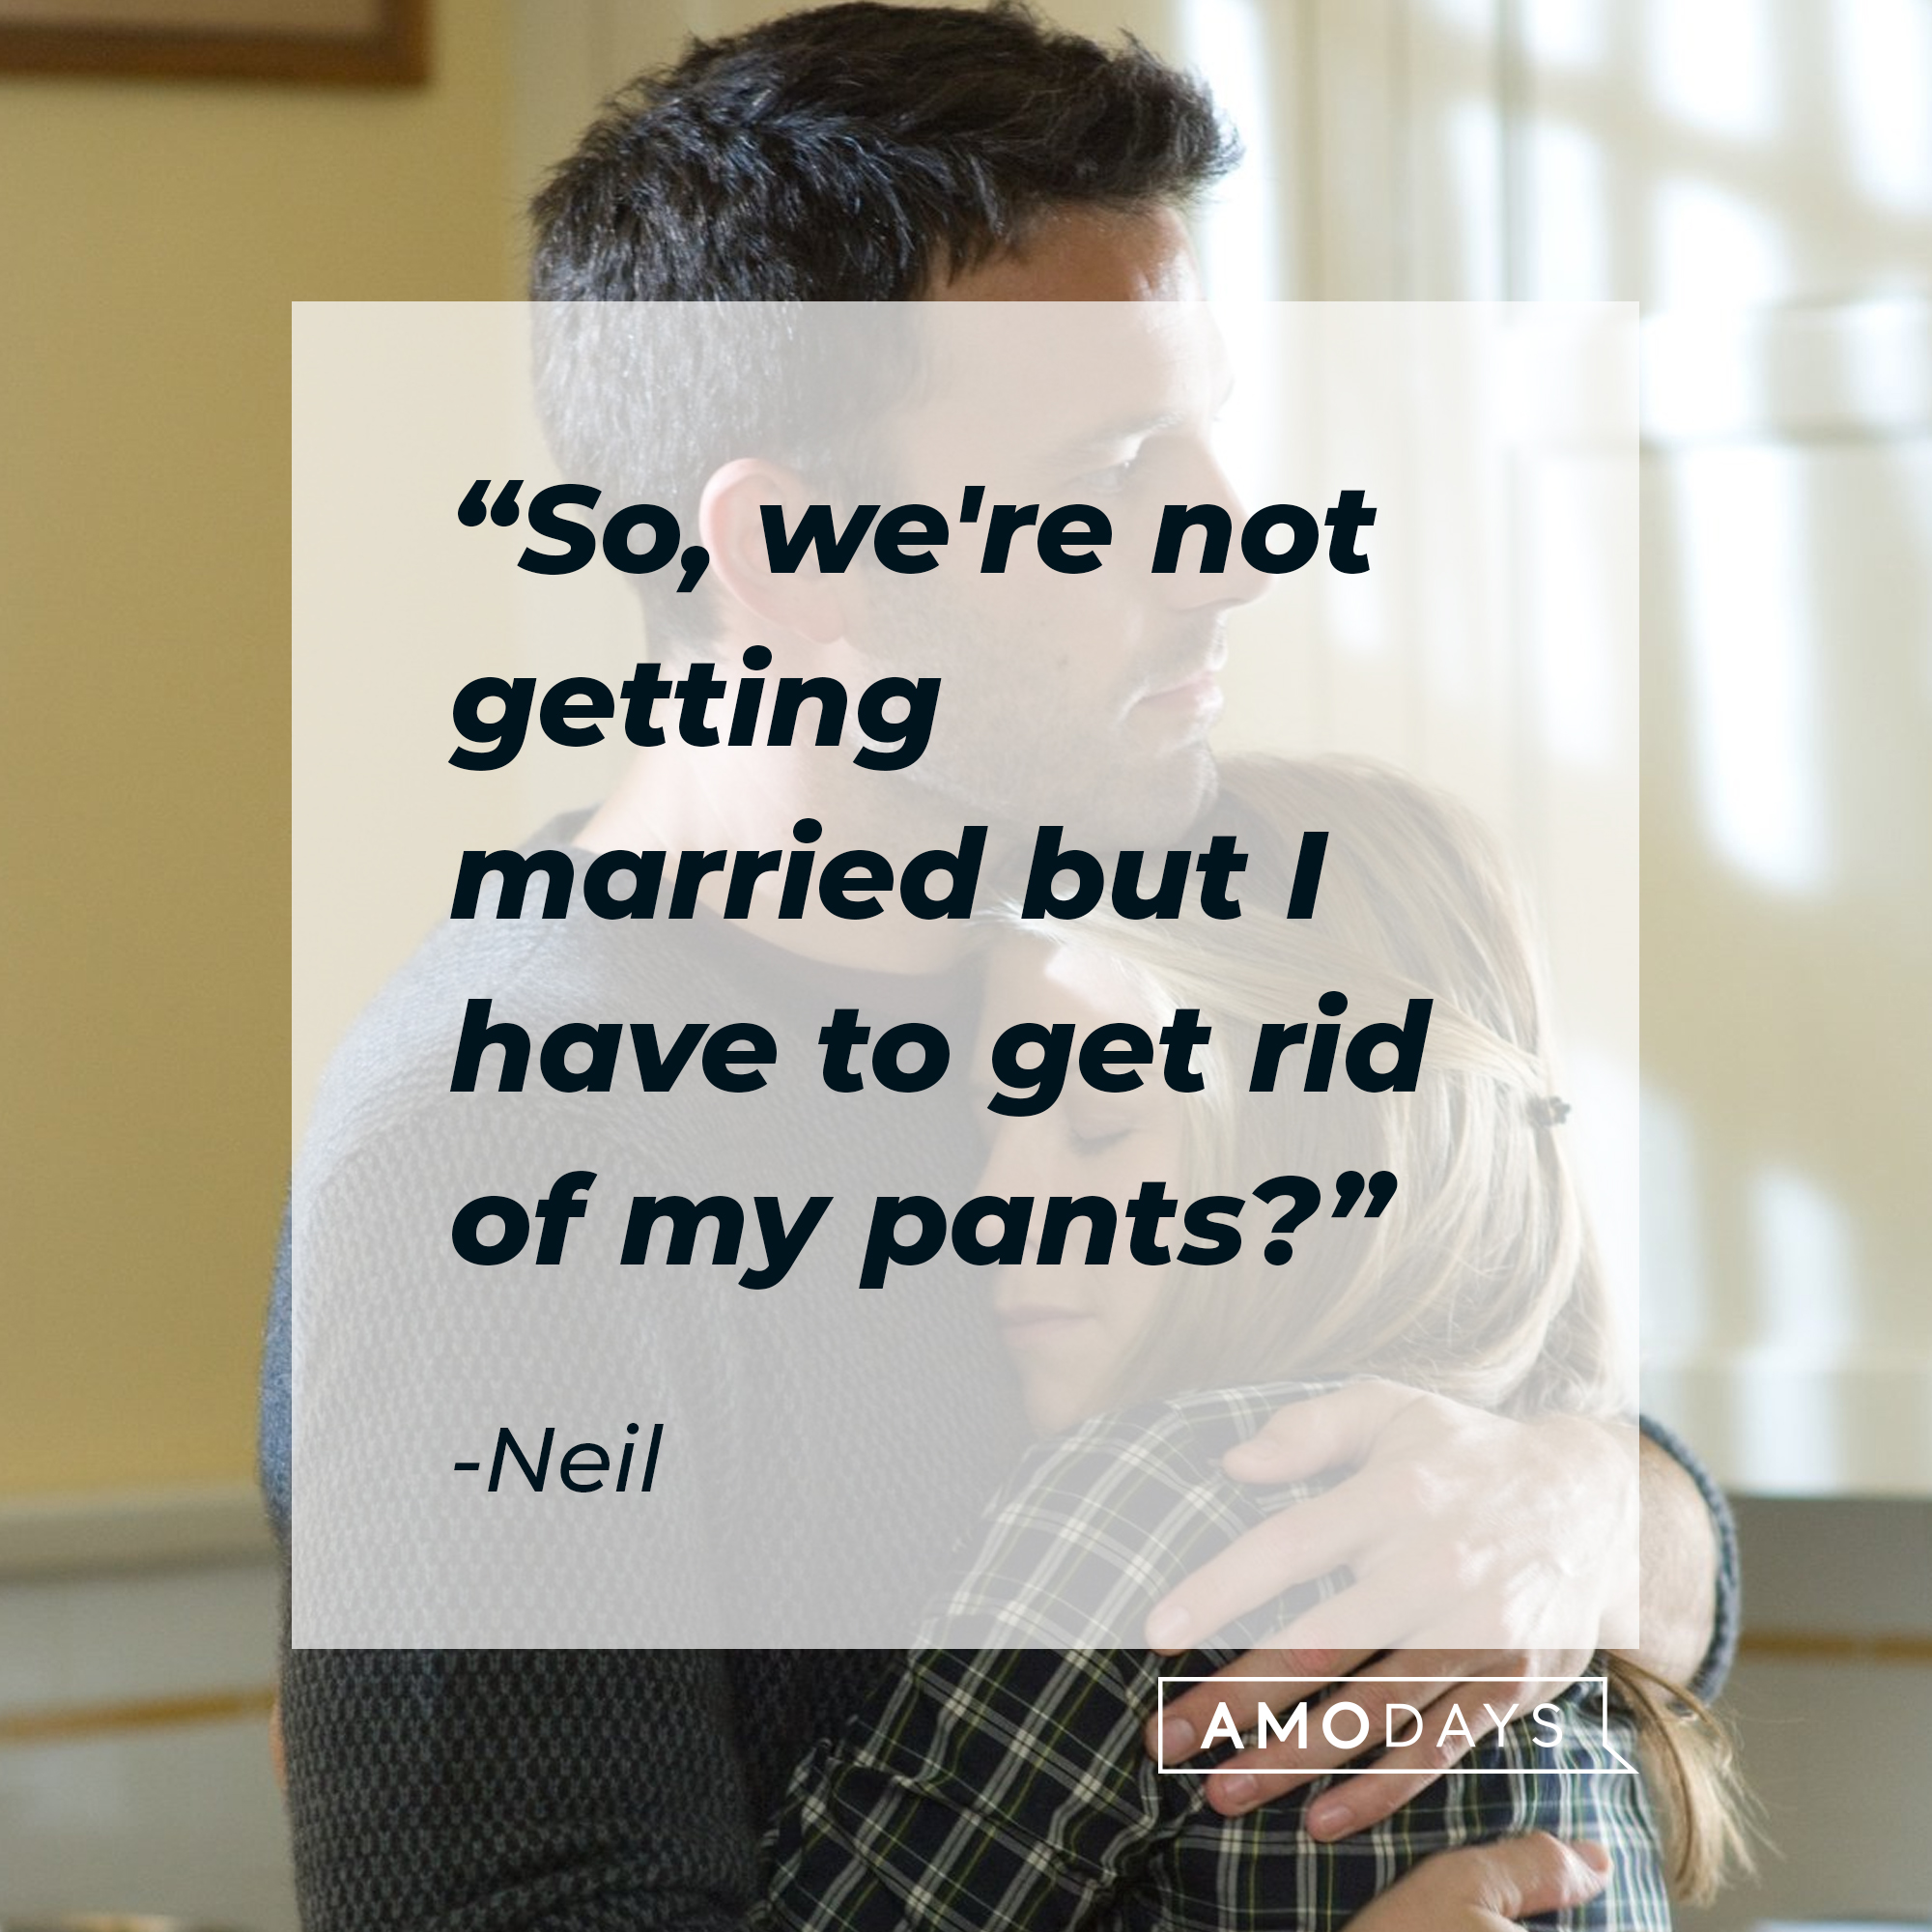 Neil's quote: "So, we're not getting married but I have to get rid of my pants?" | Source: Source: Facebook/hesjustnotthatintoyou